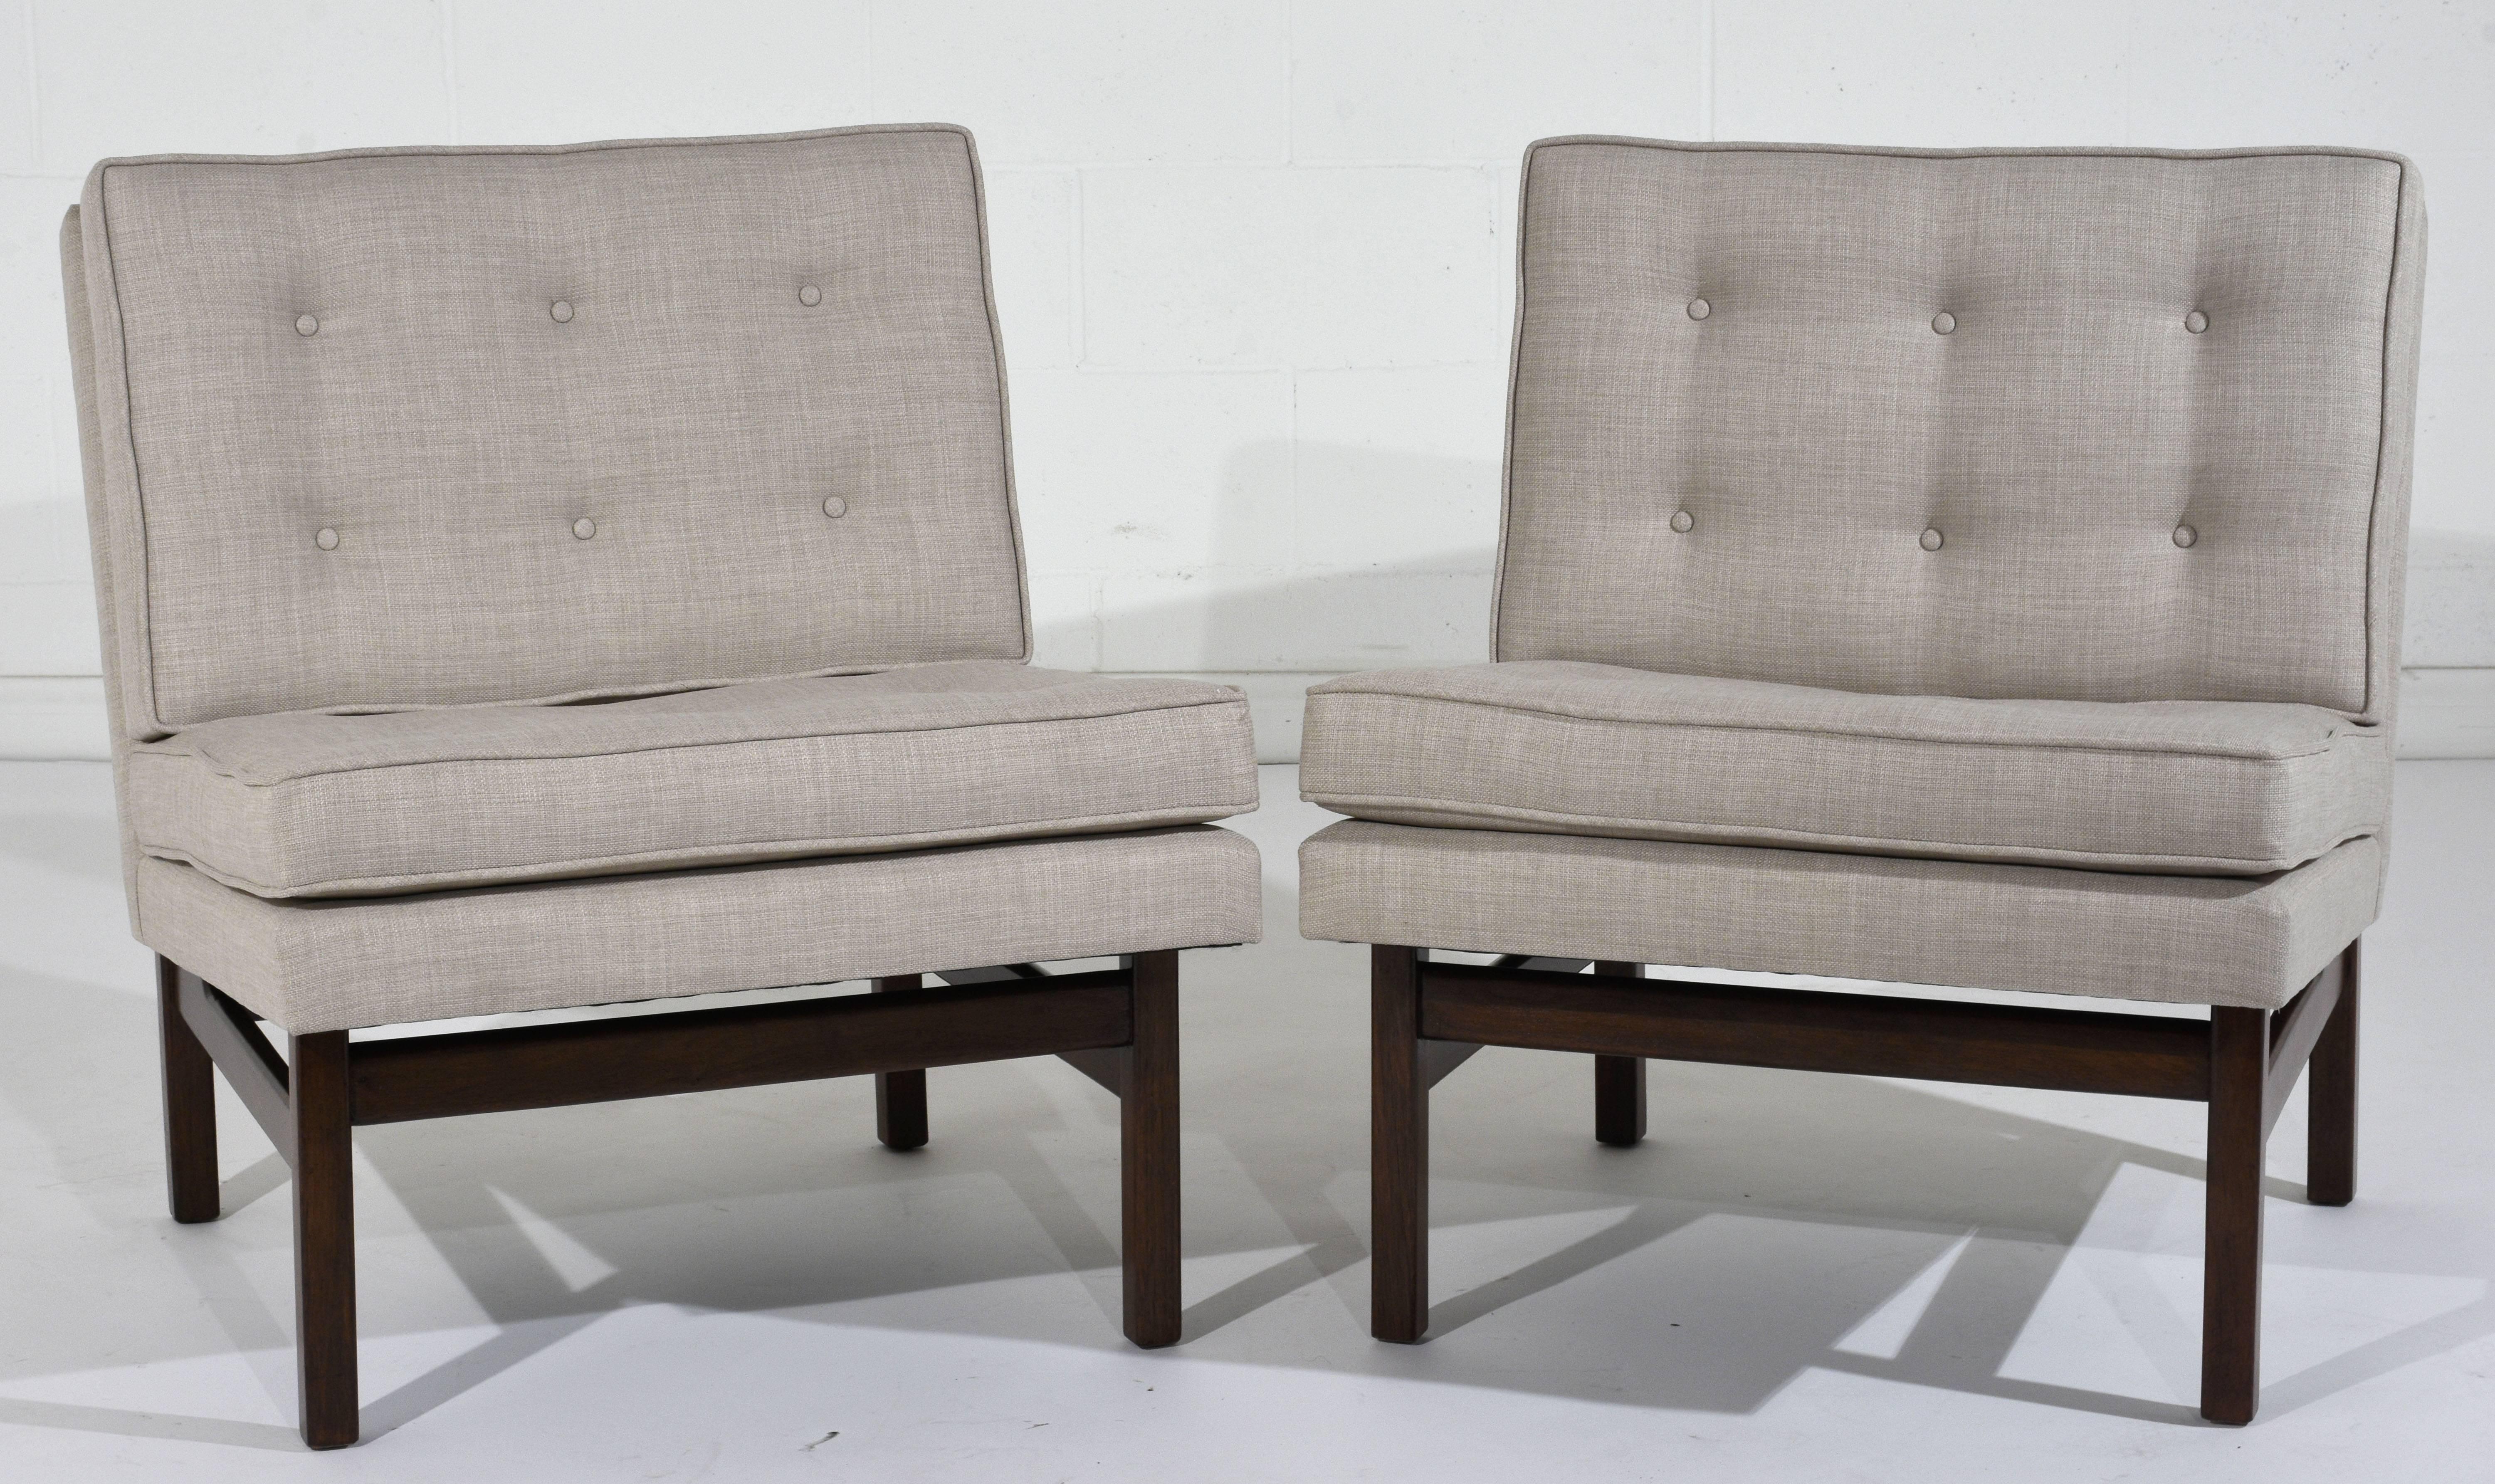 This pair of 1960s Mid-Century Modern-style Slipper Lounge Chairs are made out of teak wood with a rich walnut color stain and a newly lacquered finish. These slipper chairs have been professionally upholstered in a new soft gray color fabric with